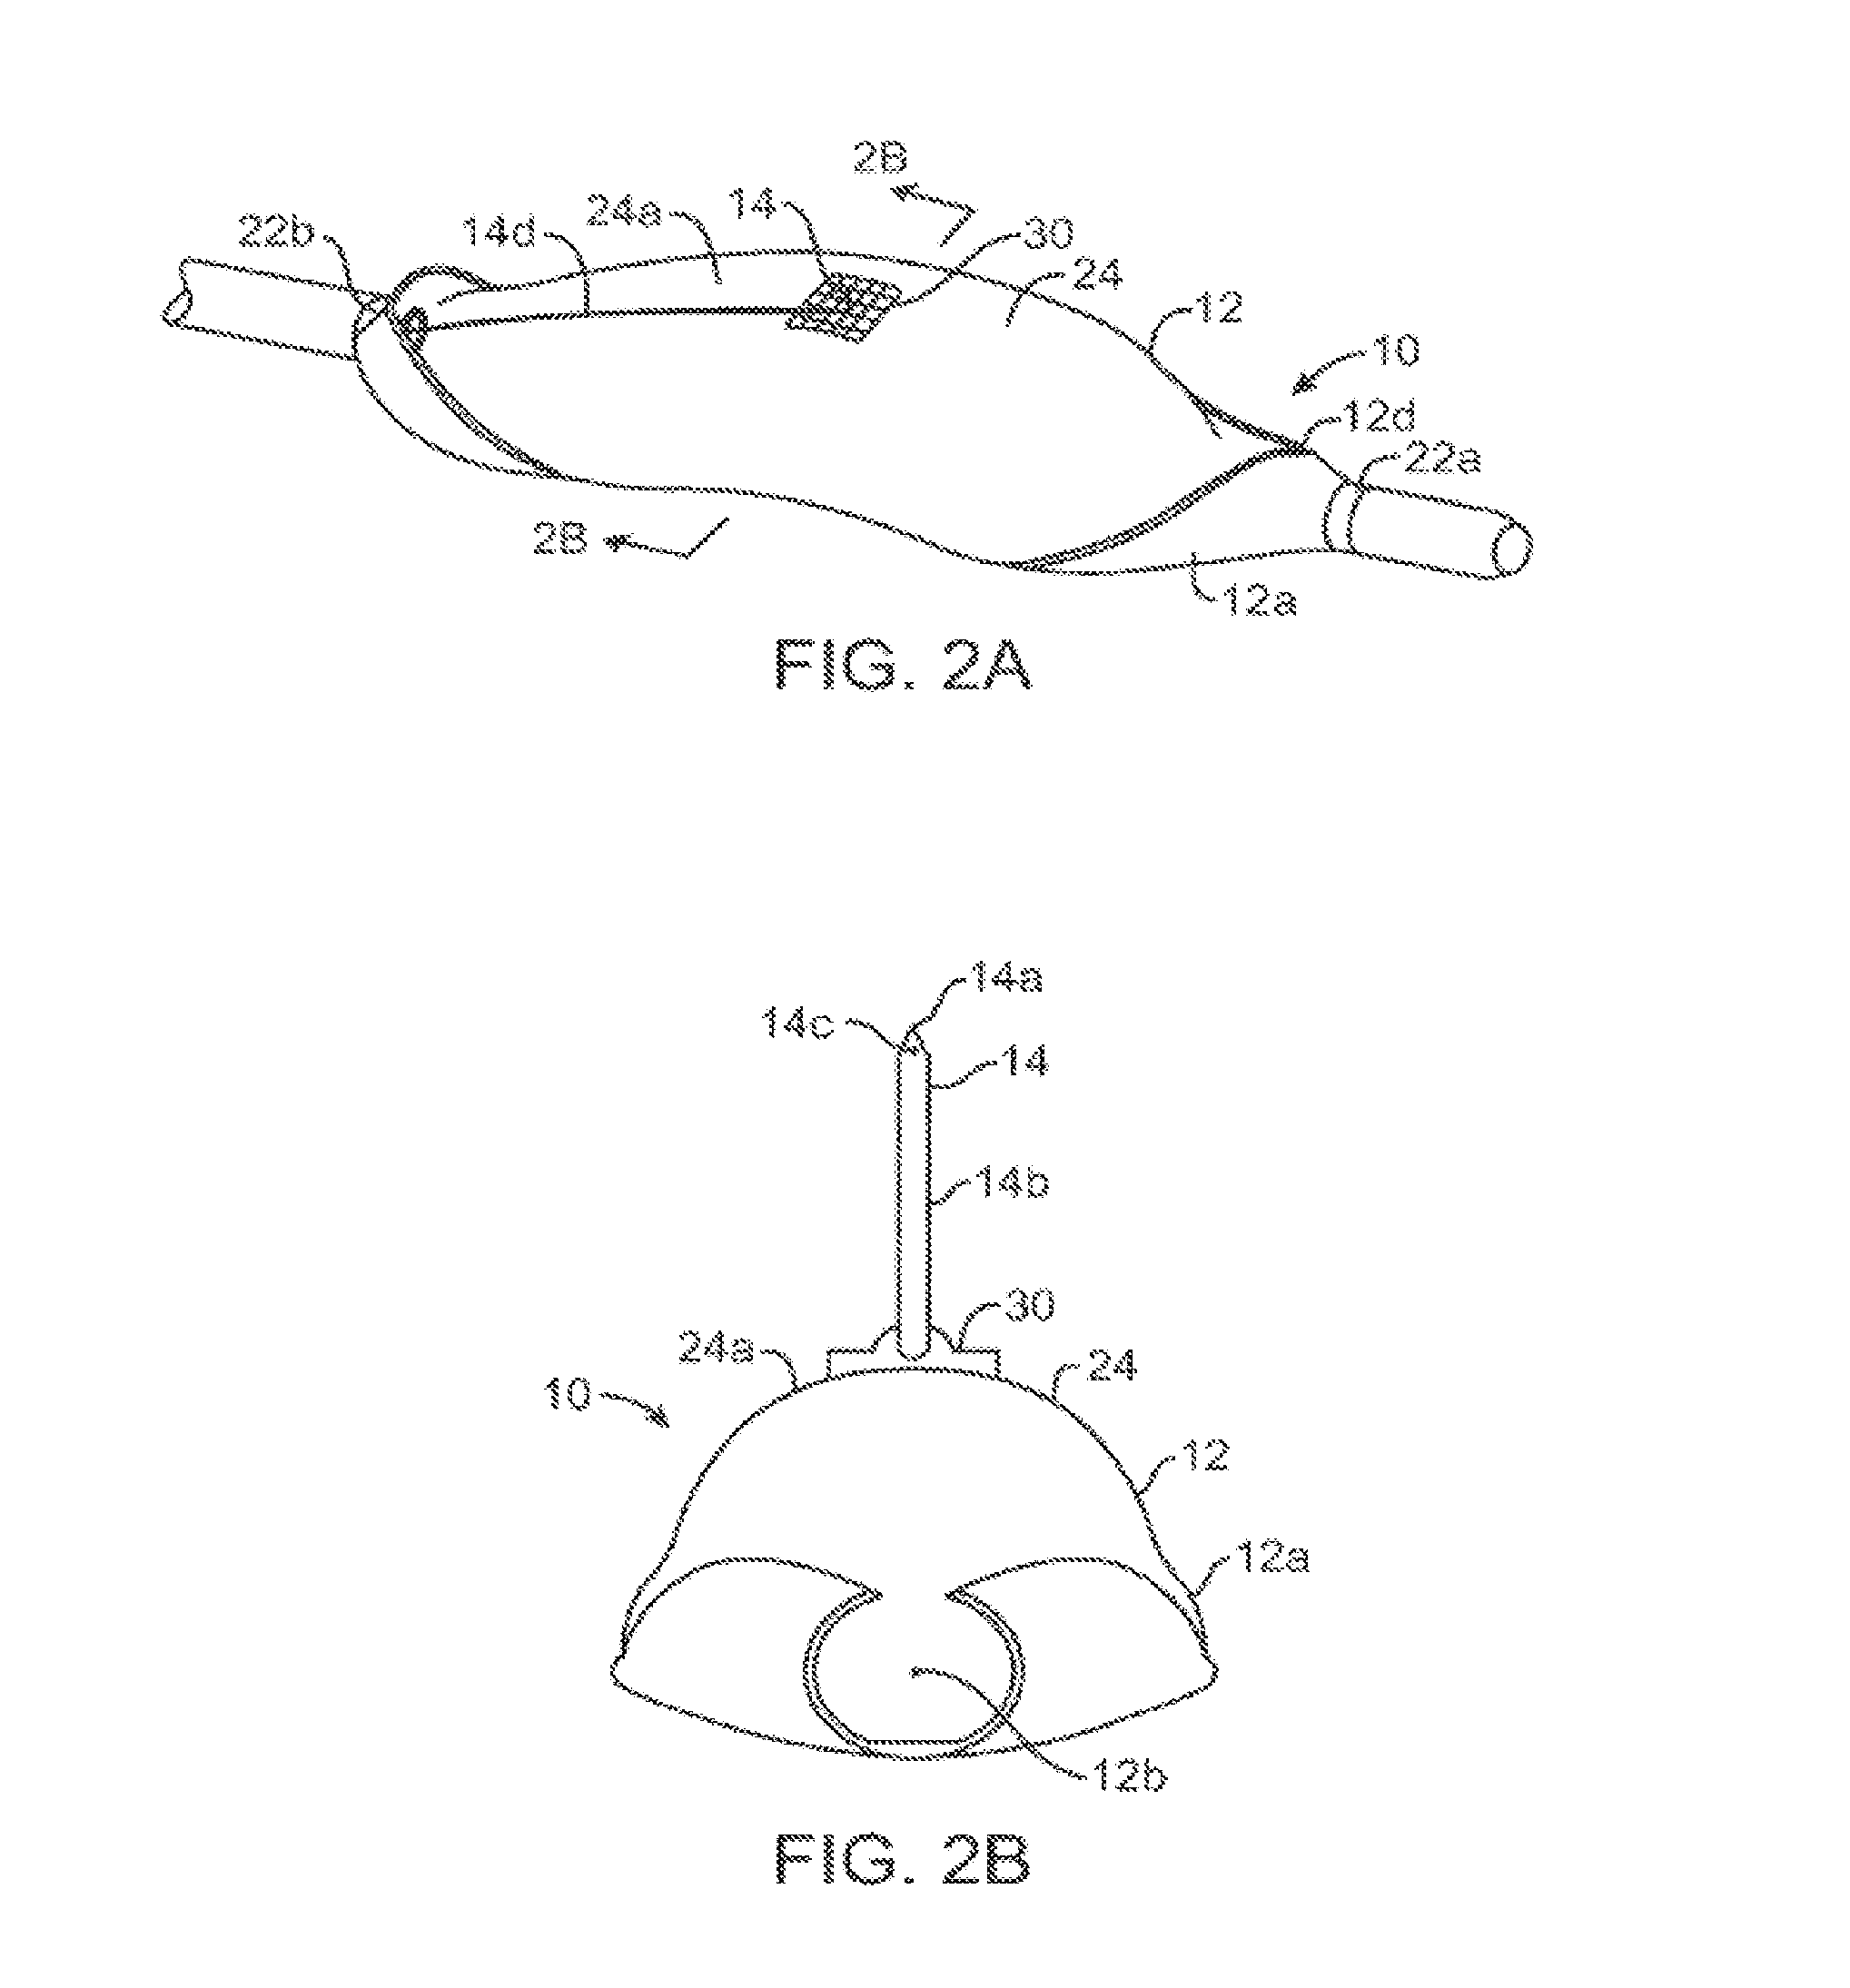 Systems and methods of treating malacia by local delivery of hydrogel to augment tissue